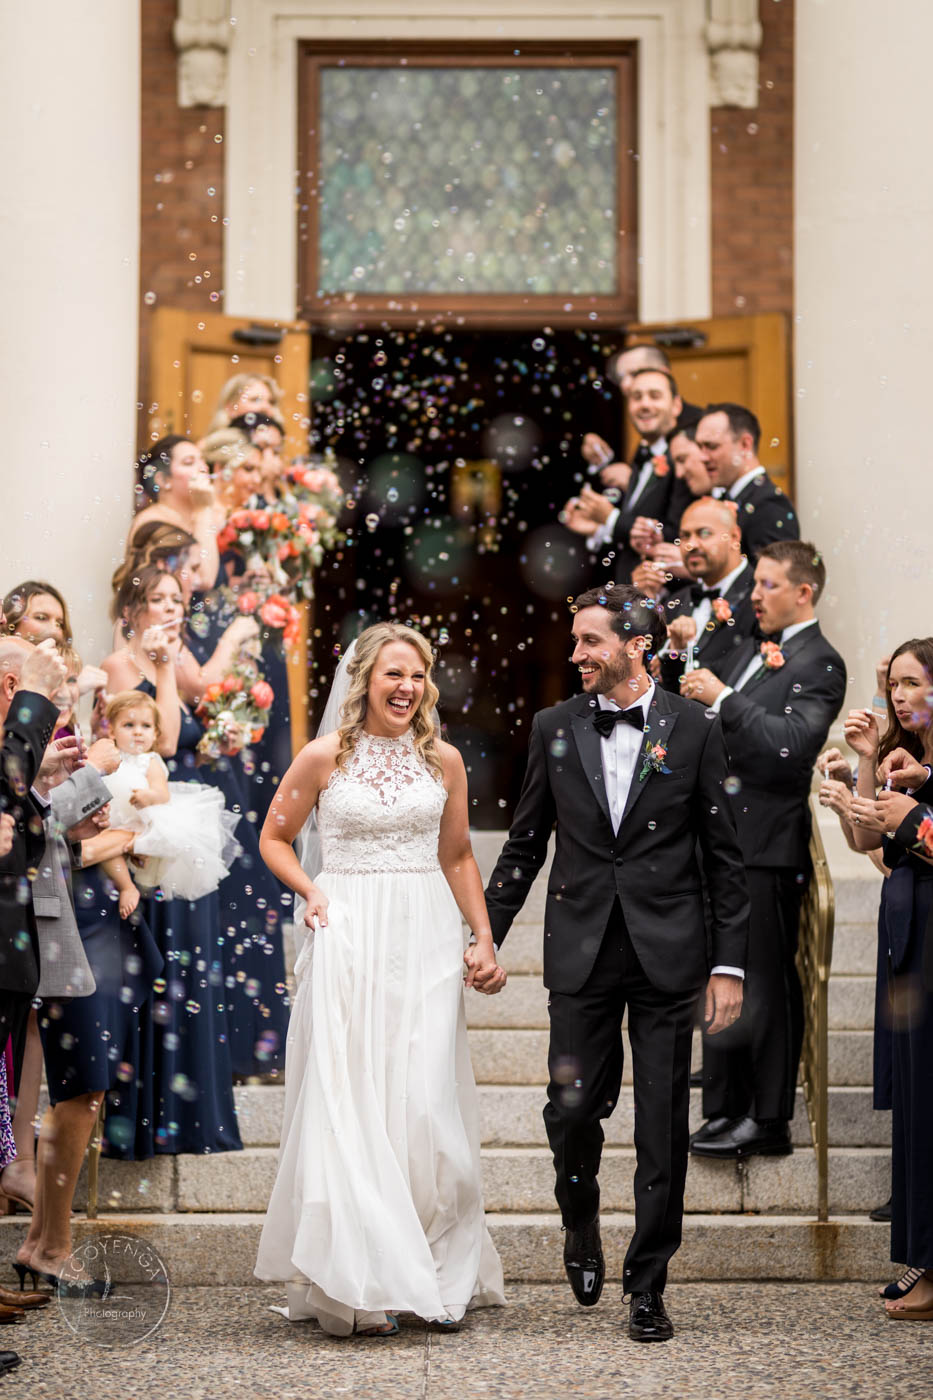 a wedding recessional following the wedding couple with a bubbles exit